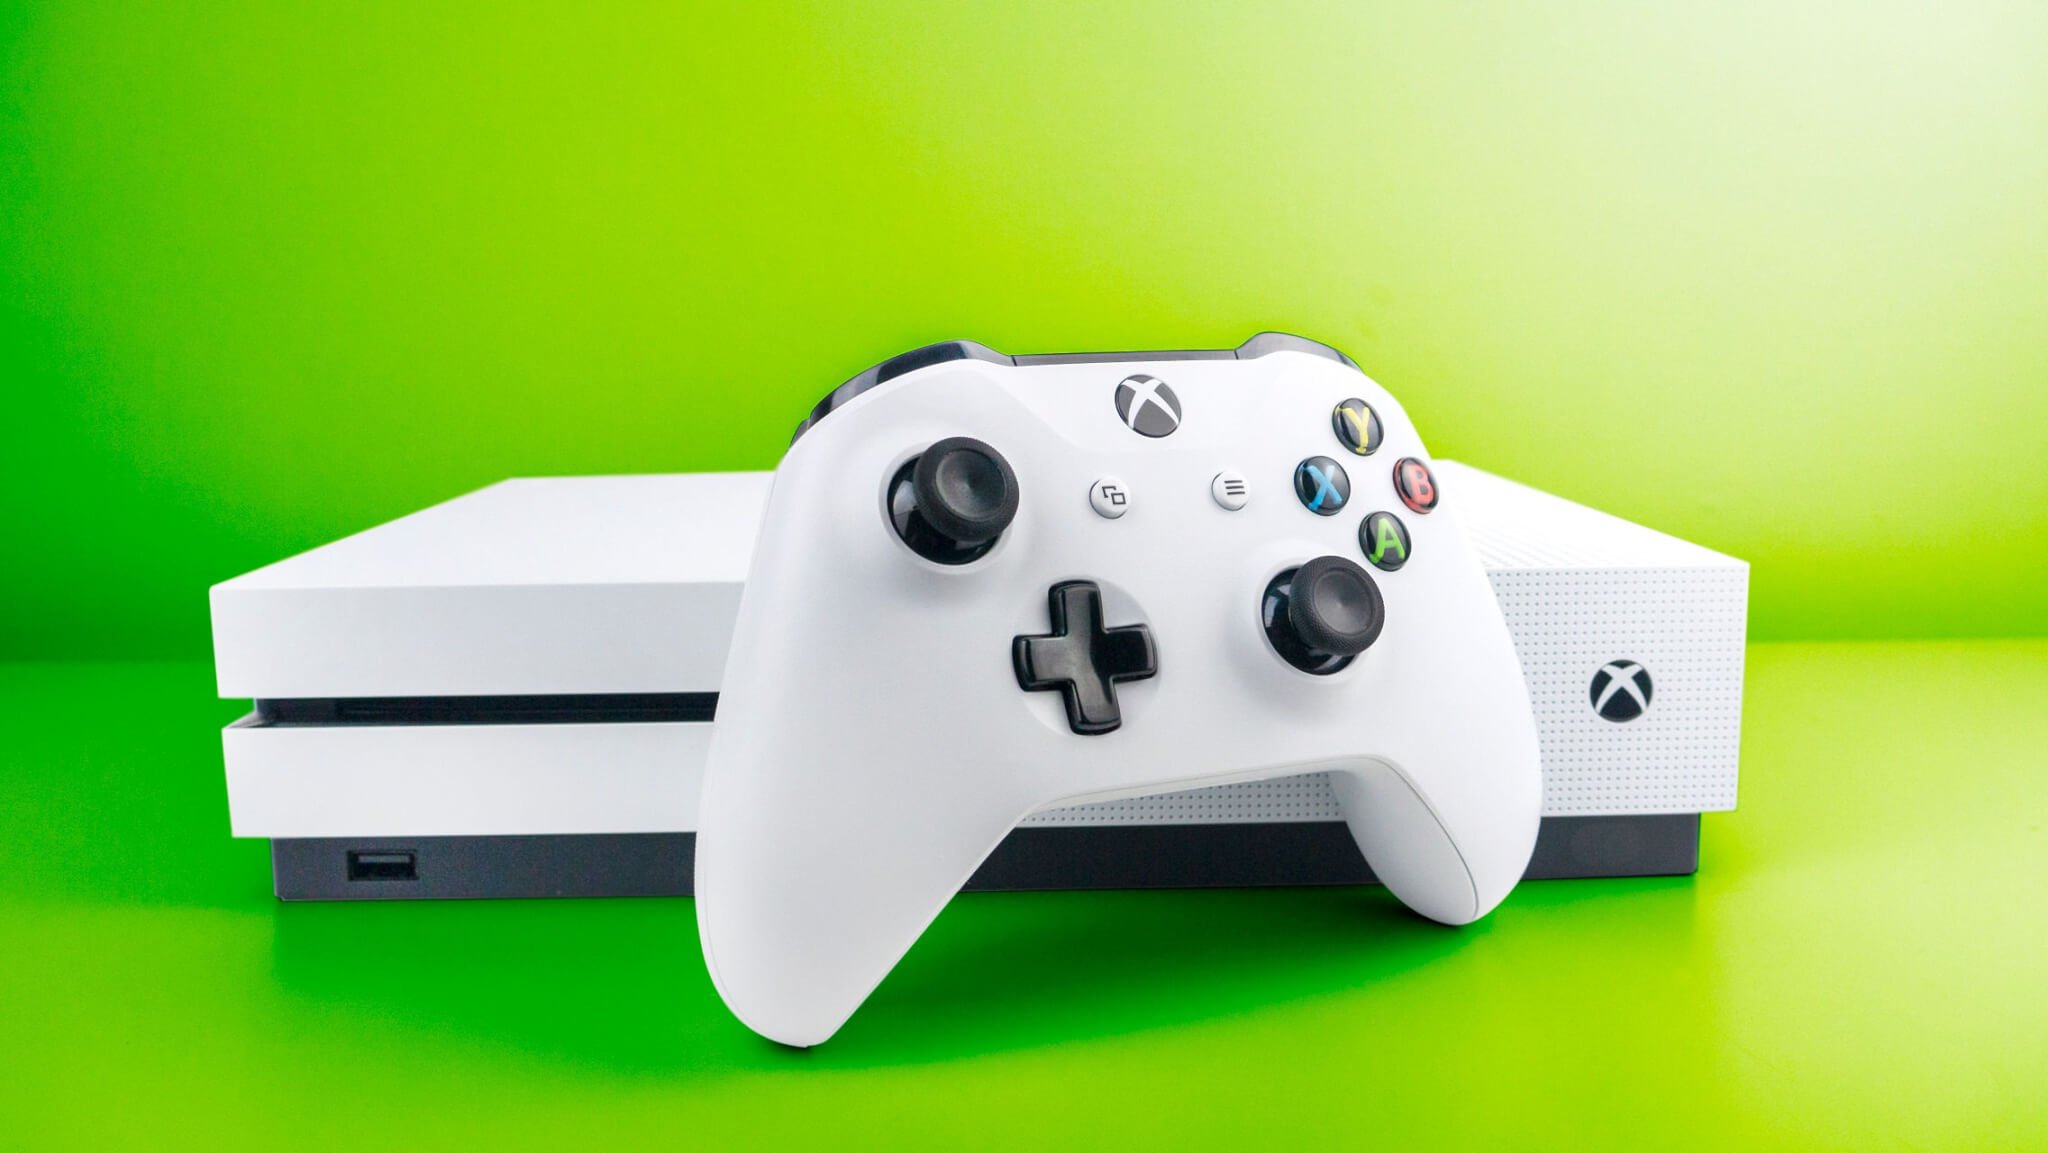 januari Haat Product Xbox One S Keeps Disconnecting from Wi-Fi: How to Fix